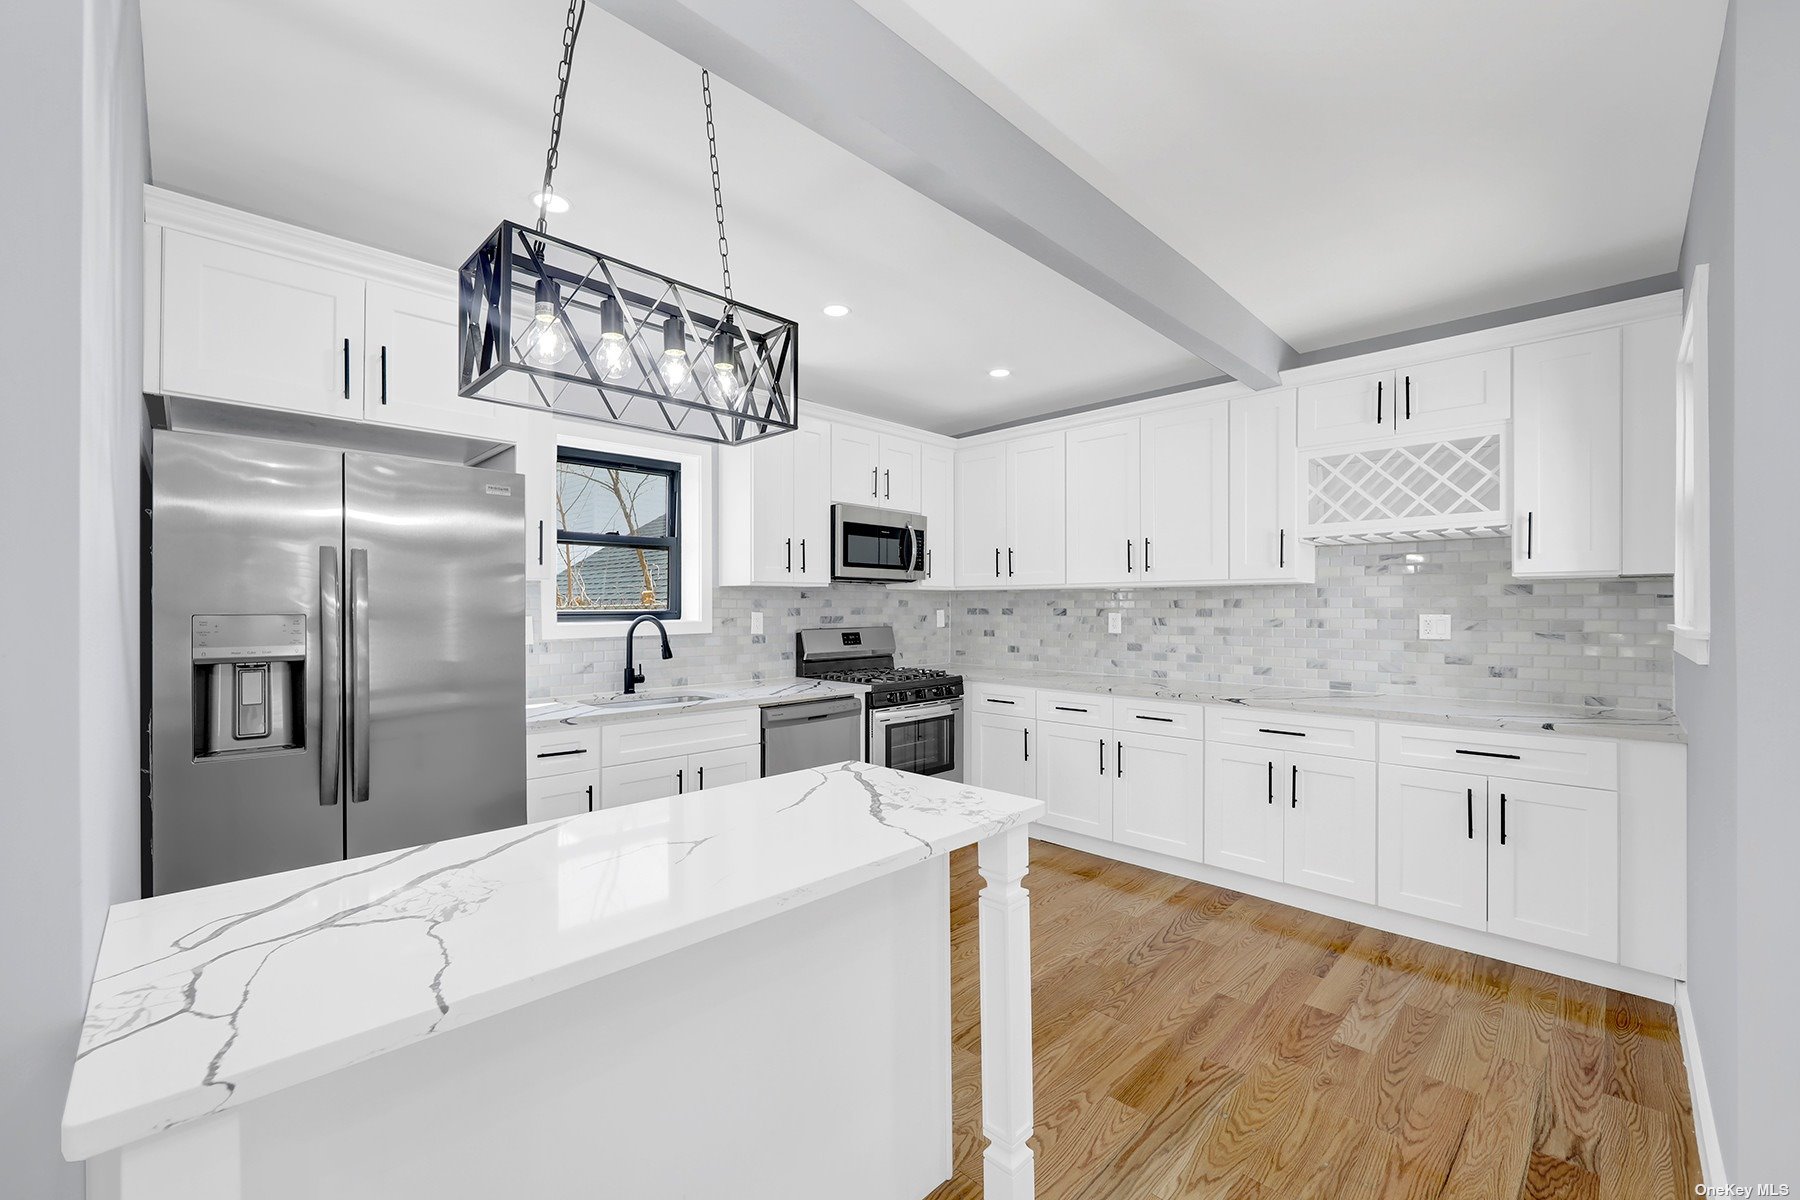 a kitchen with stainless steel appliances kitchen island granite countertop a refrigerator a sink dishwasher a oven with white cabinets and wooden floor